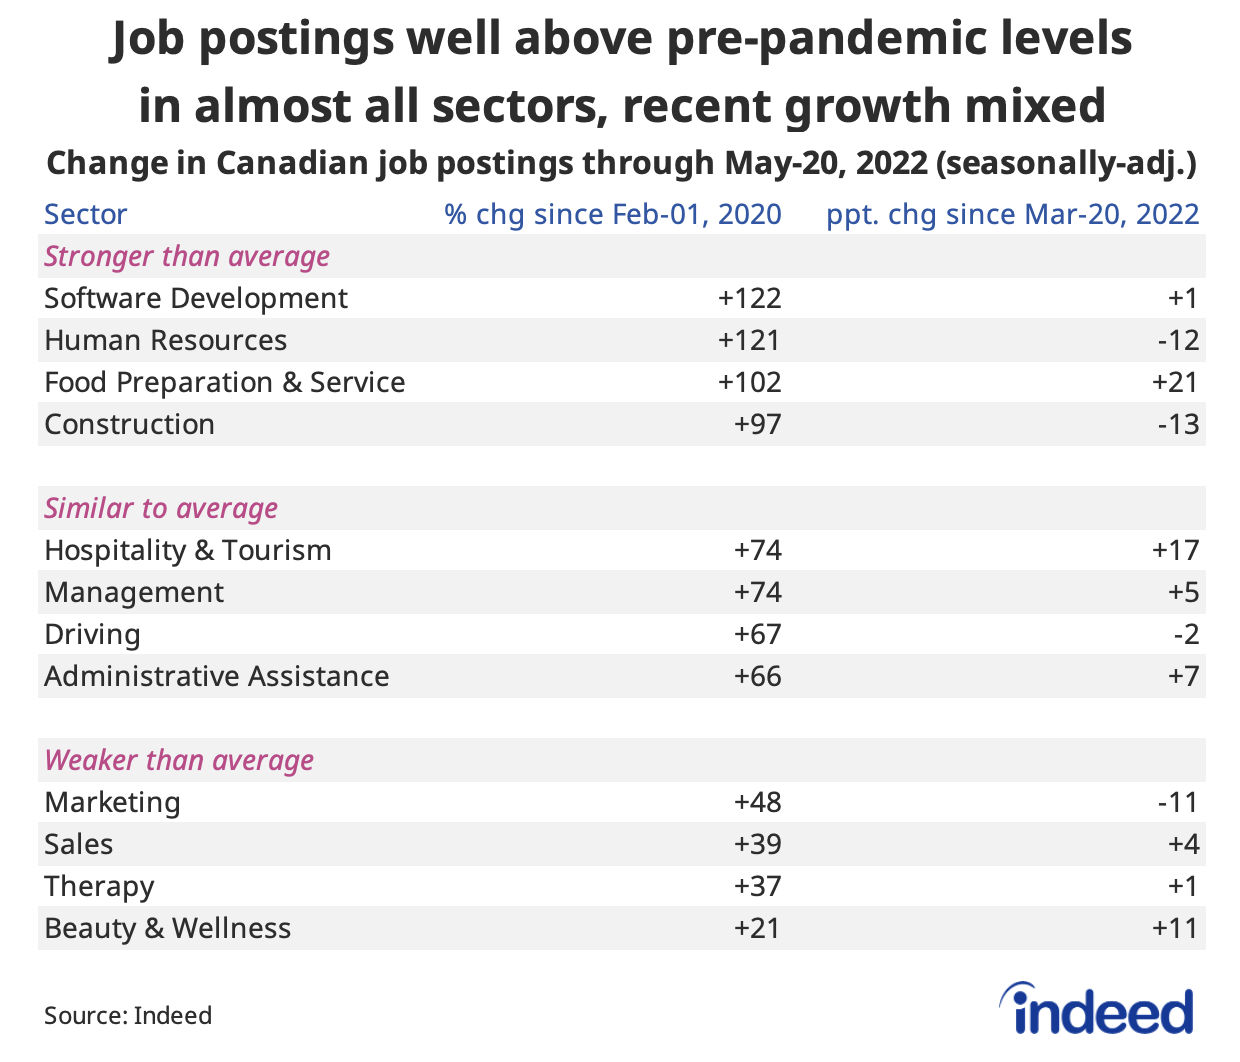 Table titled “Job postings well above pre-pandemic levels in almost all sectors, recent growth mixed.”